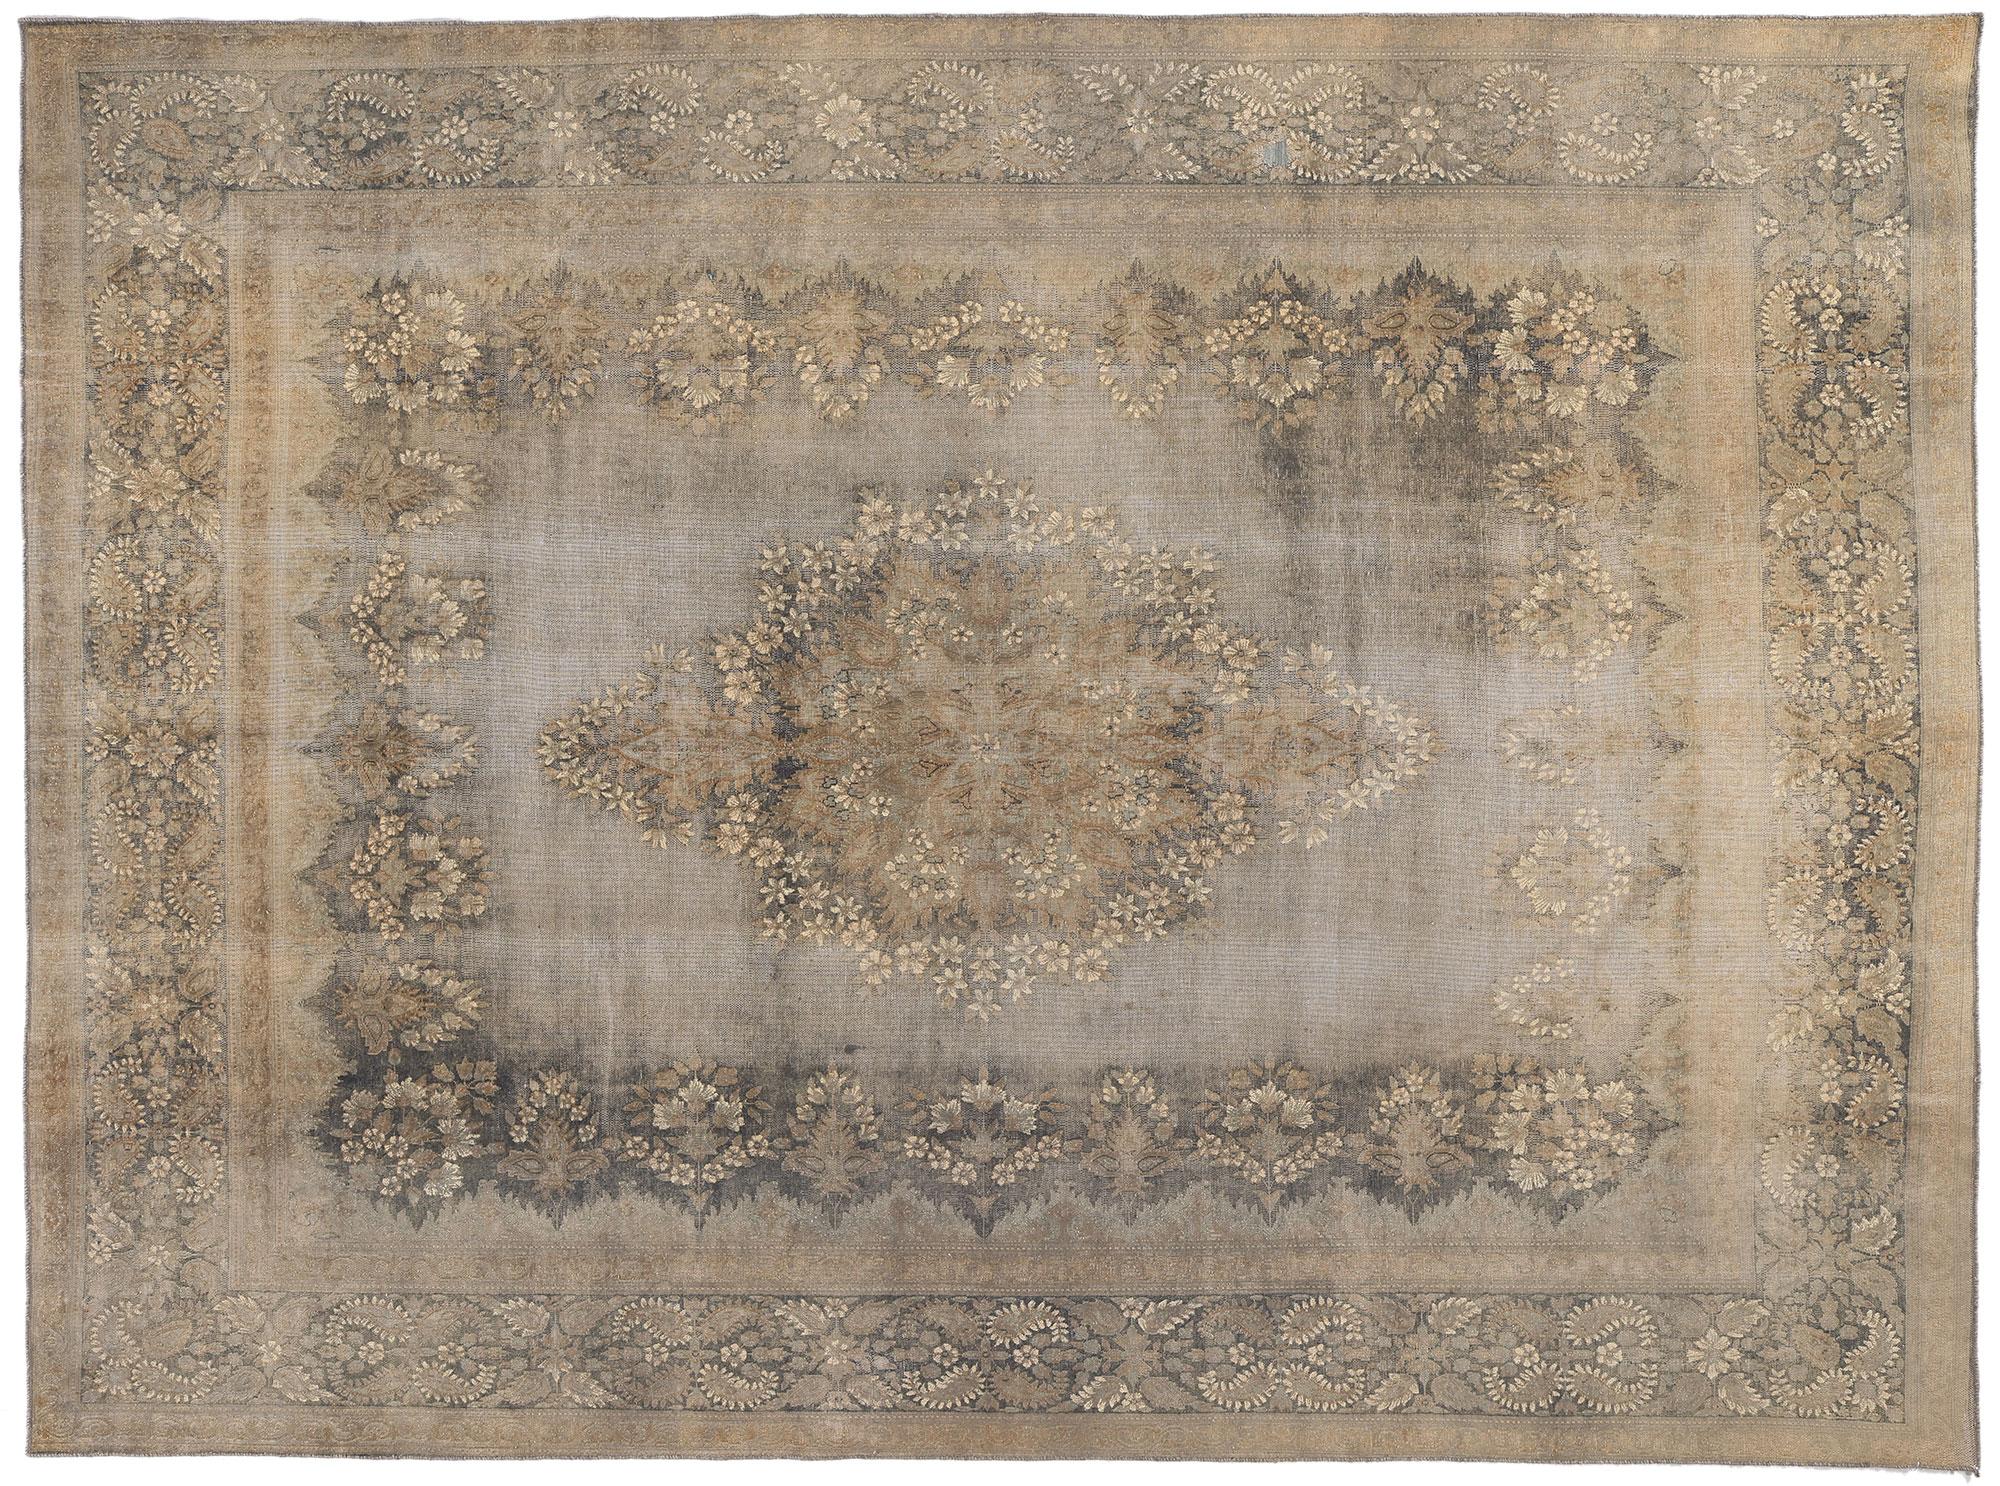 Vintage Turkish Overdyed Rug, American Colonial Revival Meets Modern Industrial For Sale 1